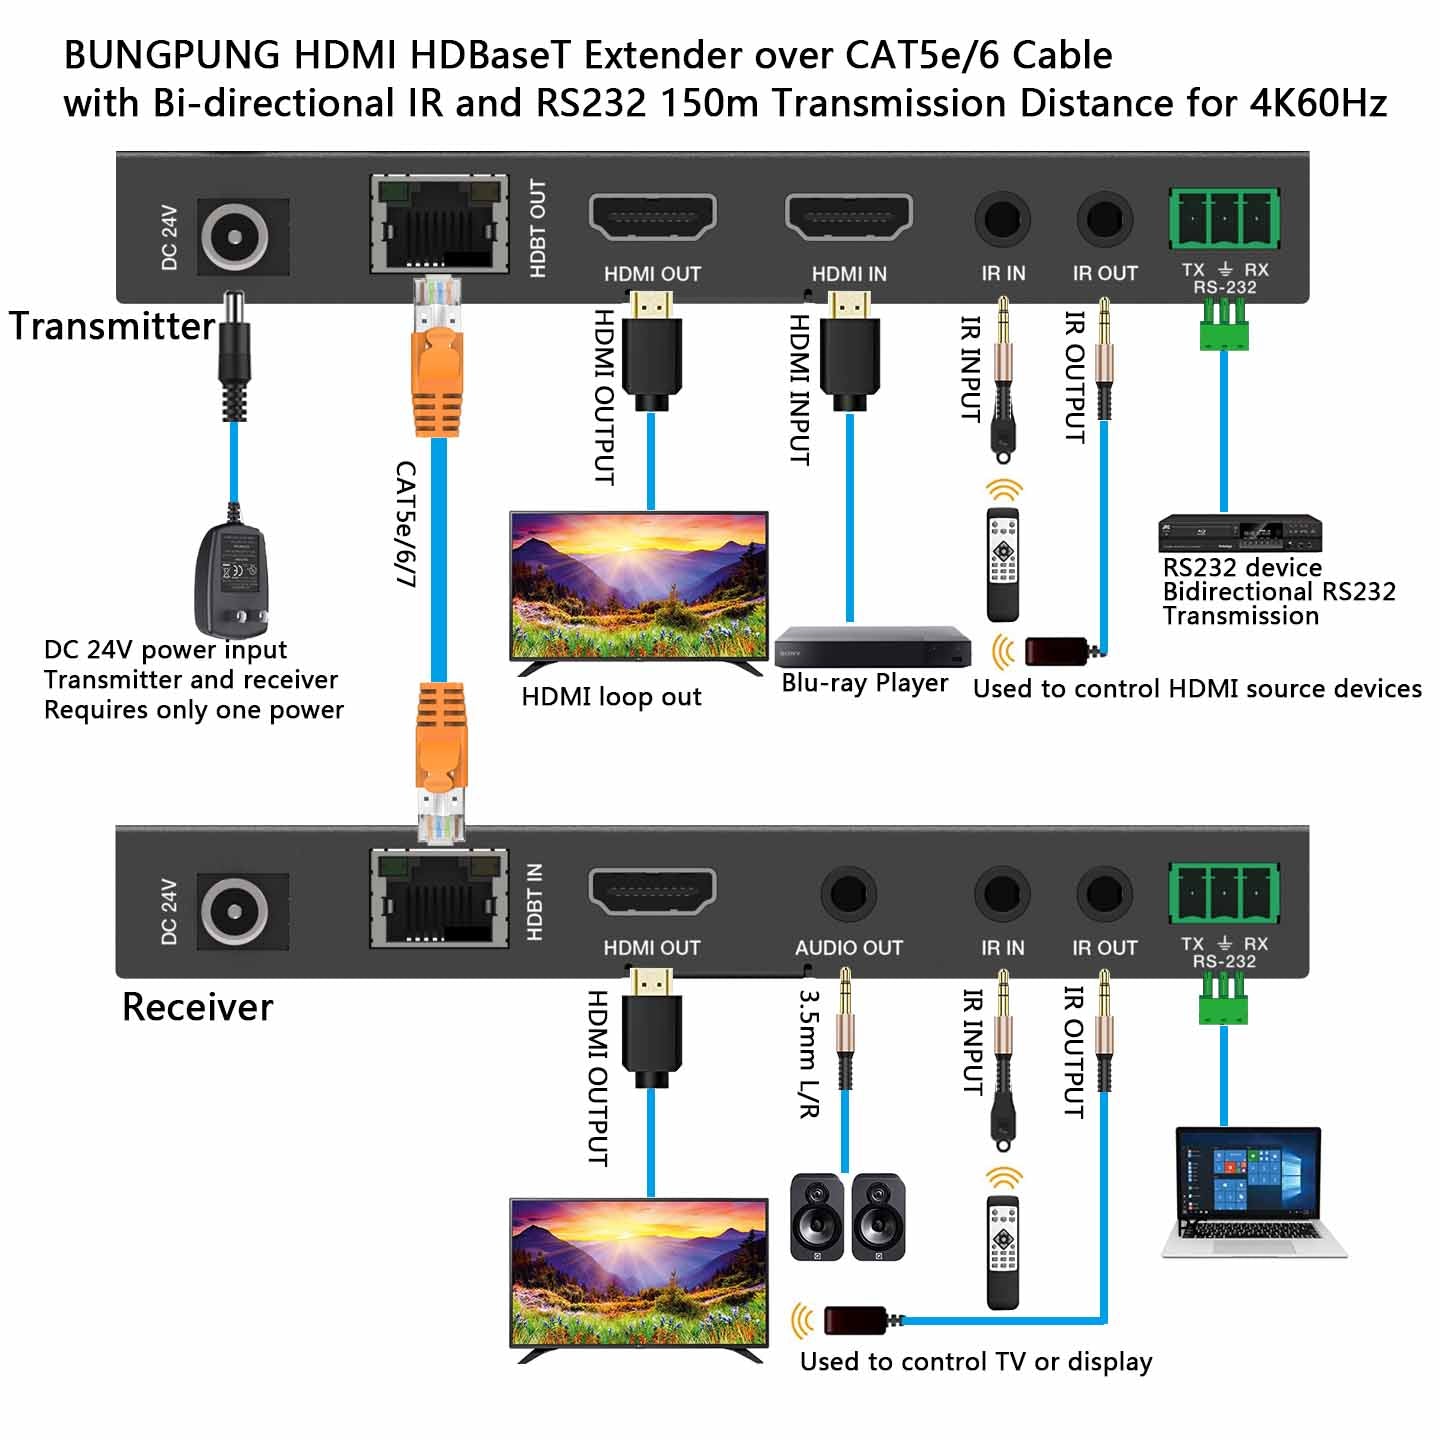 4K HDBaseT HDMI Extender over CAT6 Cable 150m IR RS232 connection